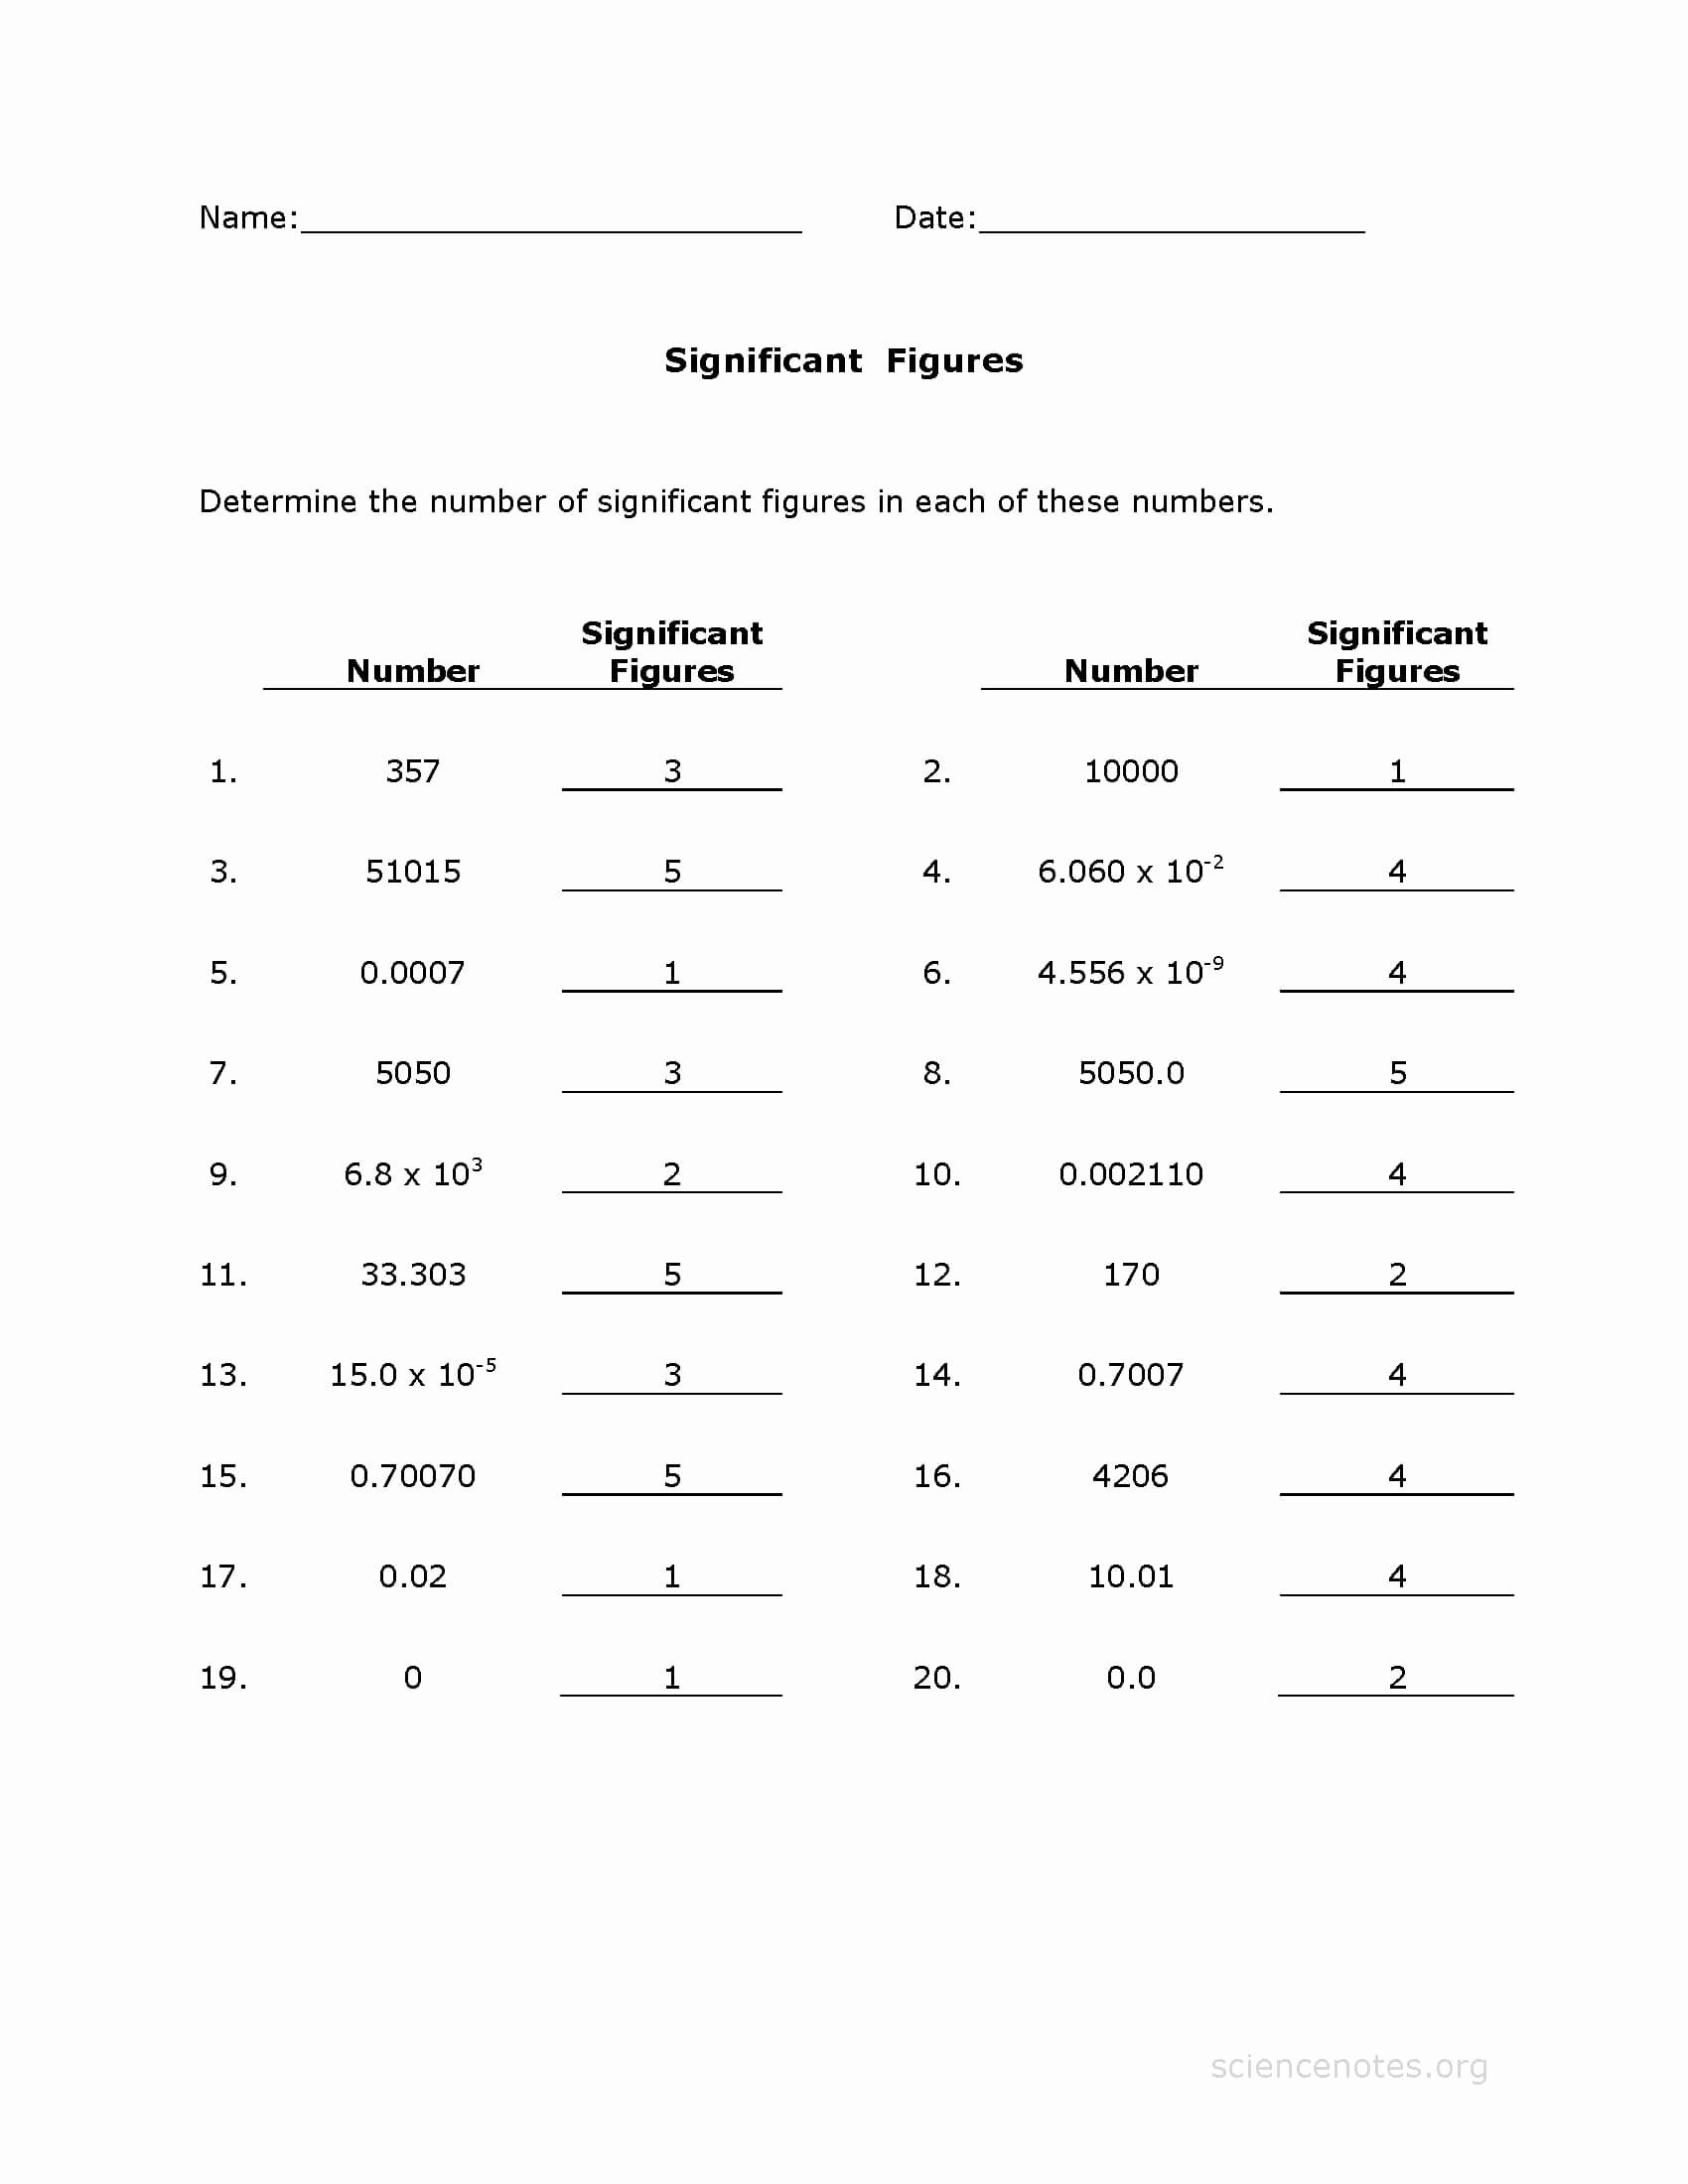 Significant Figures Worksheet Answers New Significant Figures Worksheet Page 2 Of 2